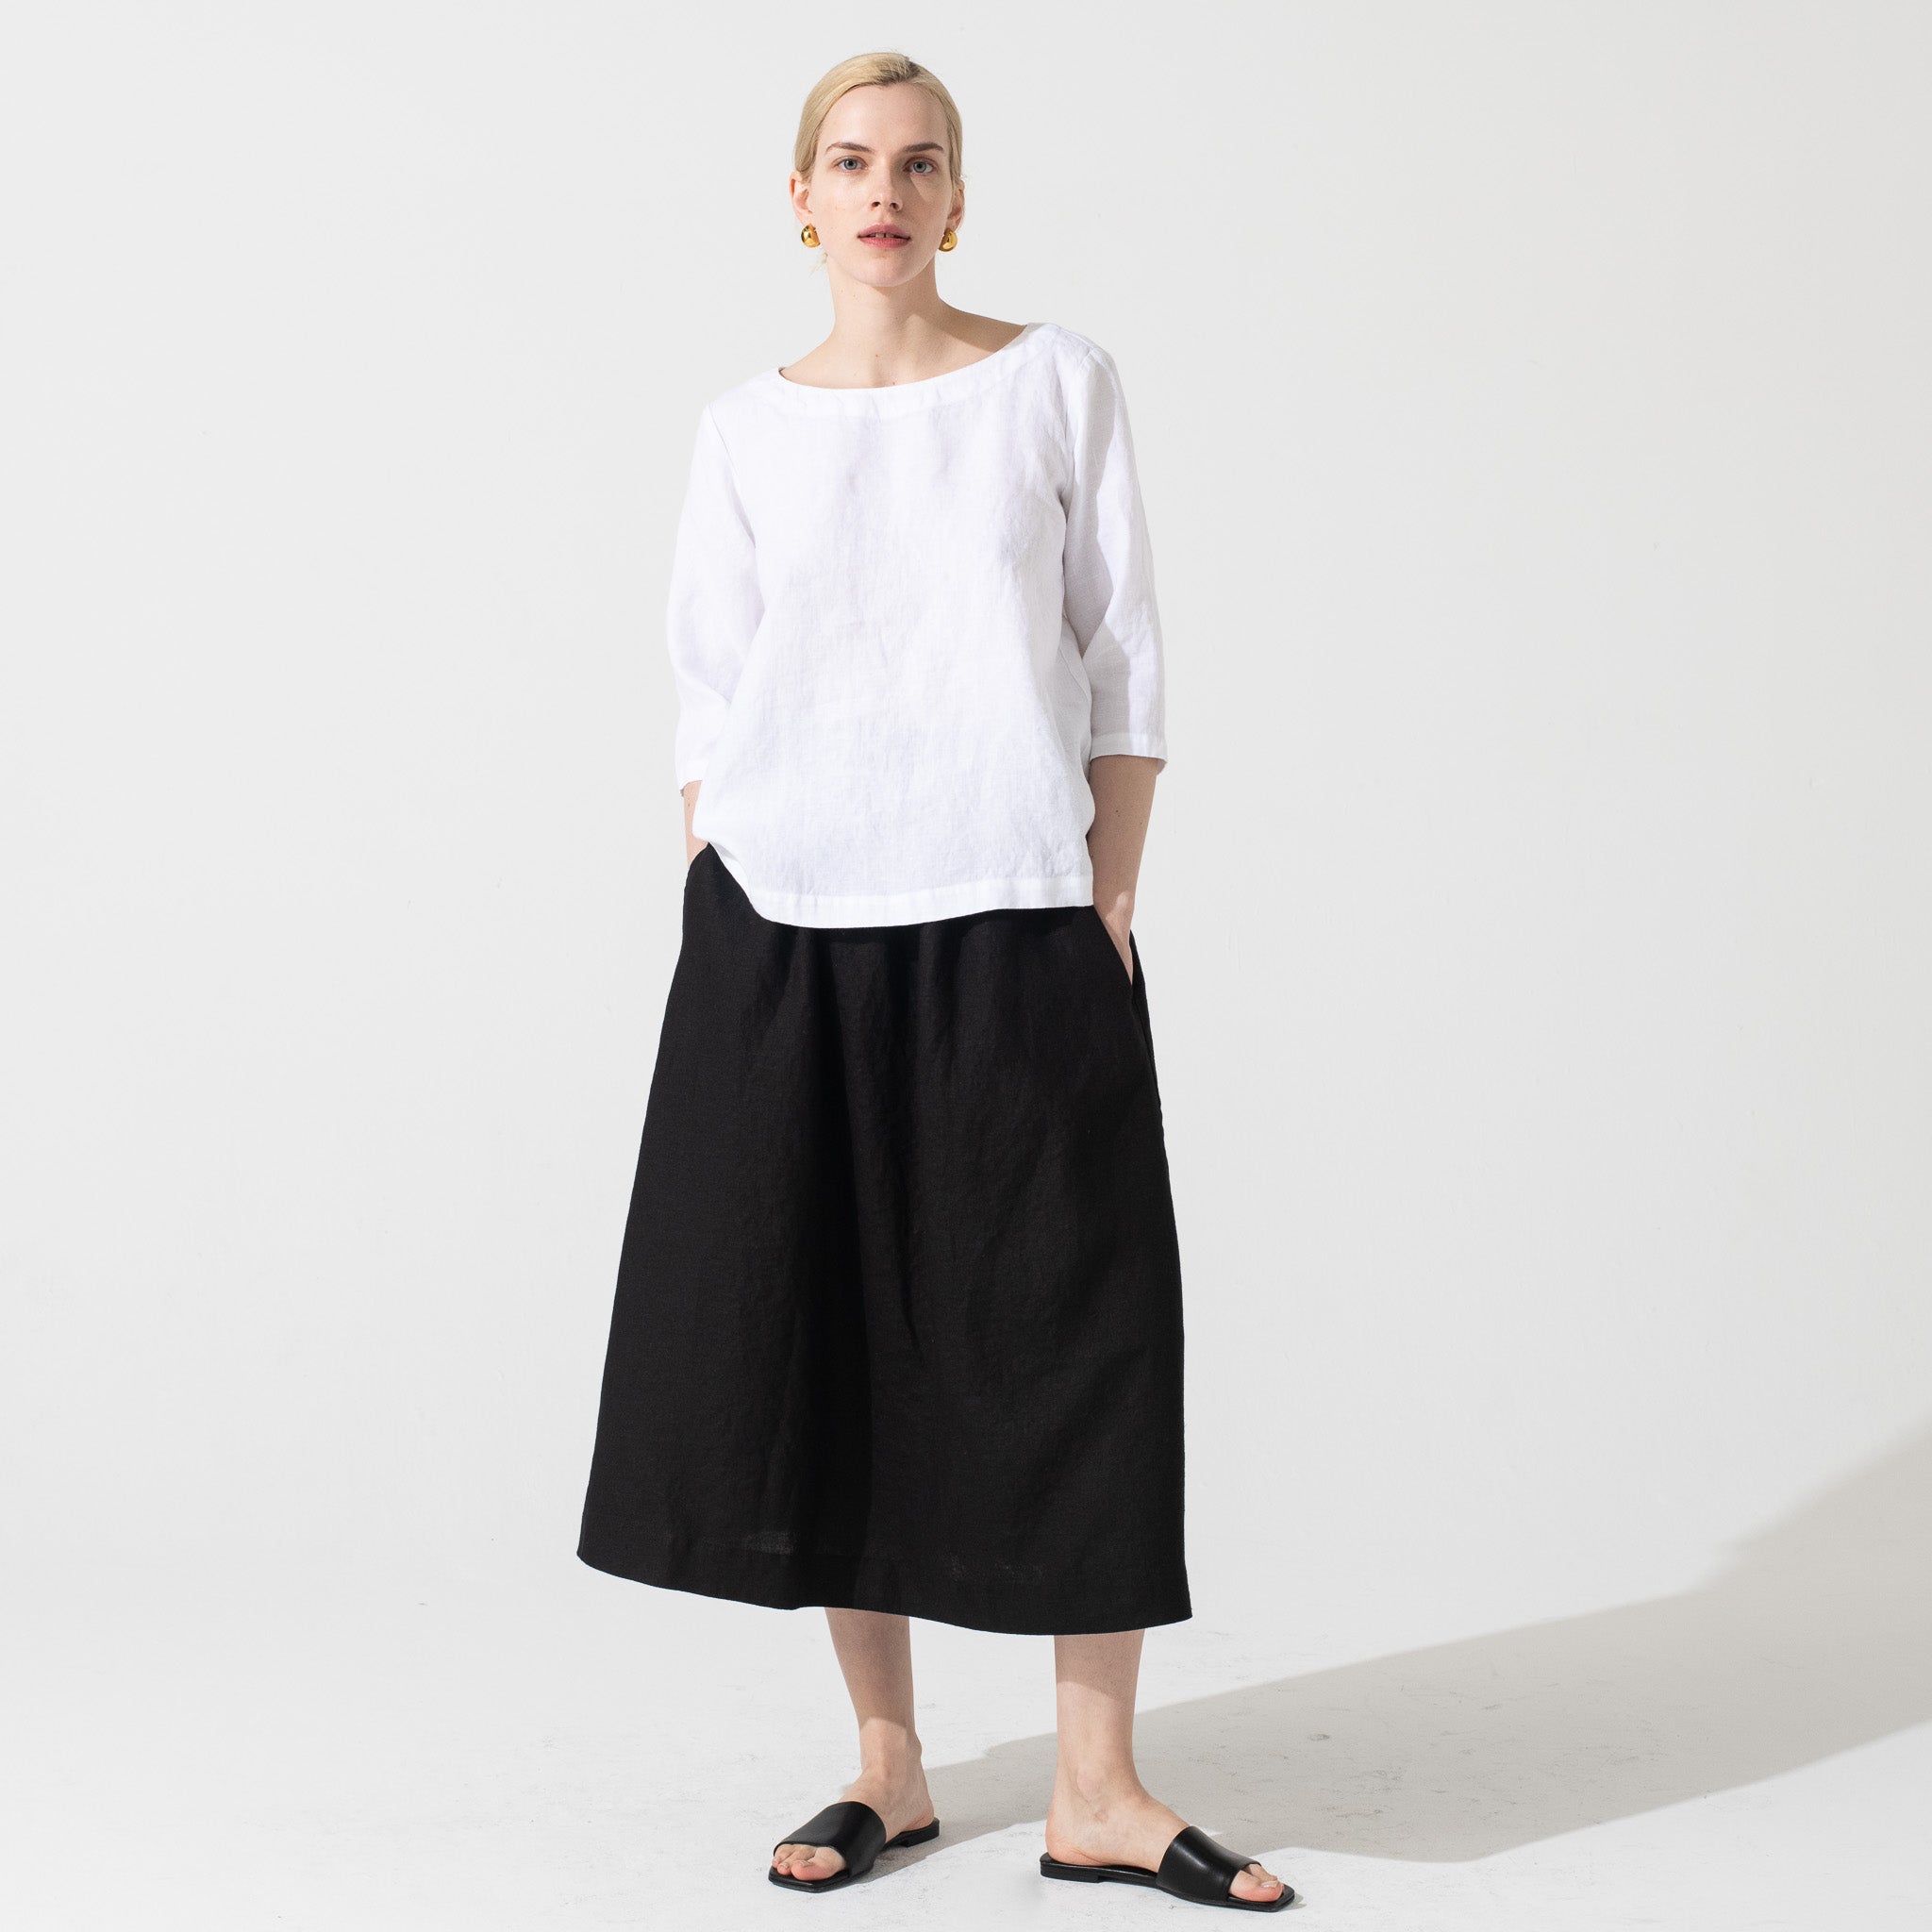 SION gathered linen skirt in Black